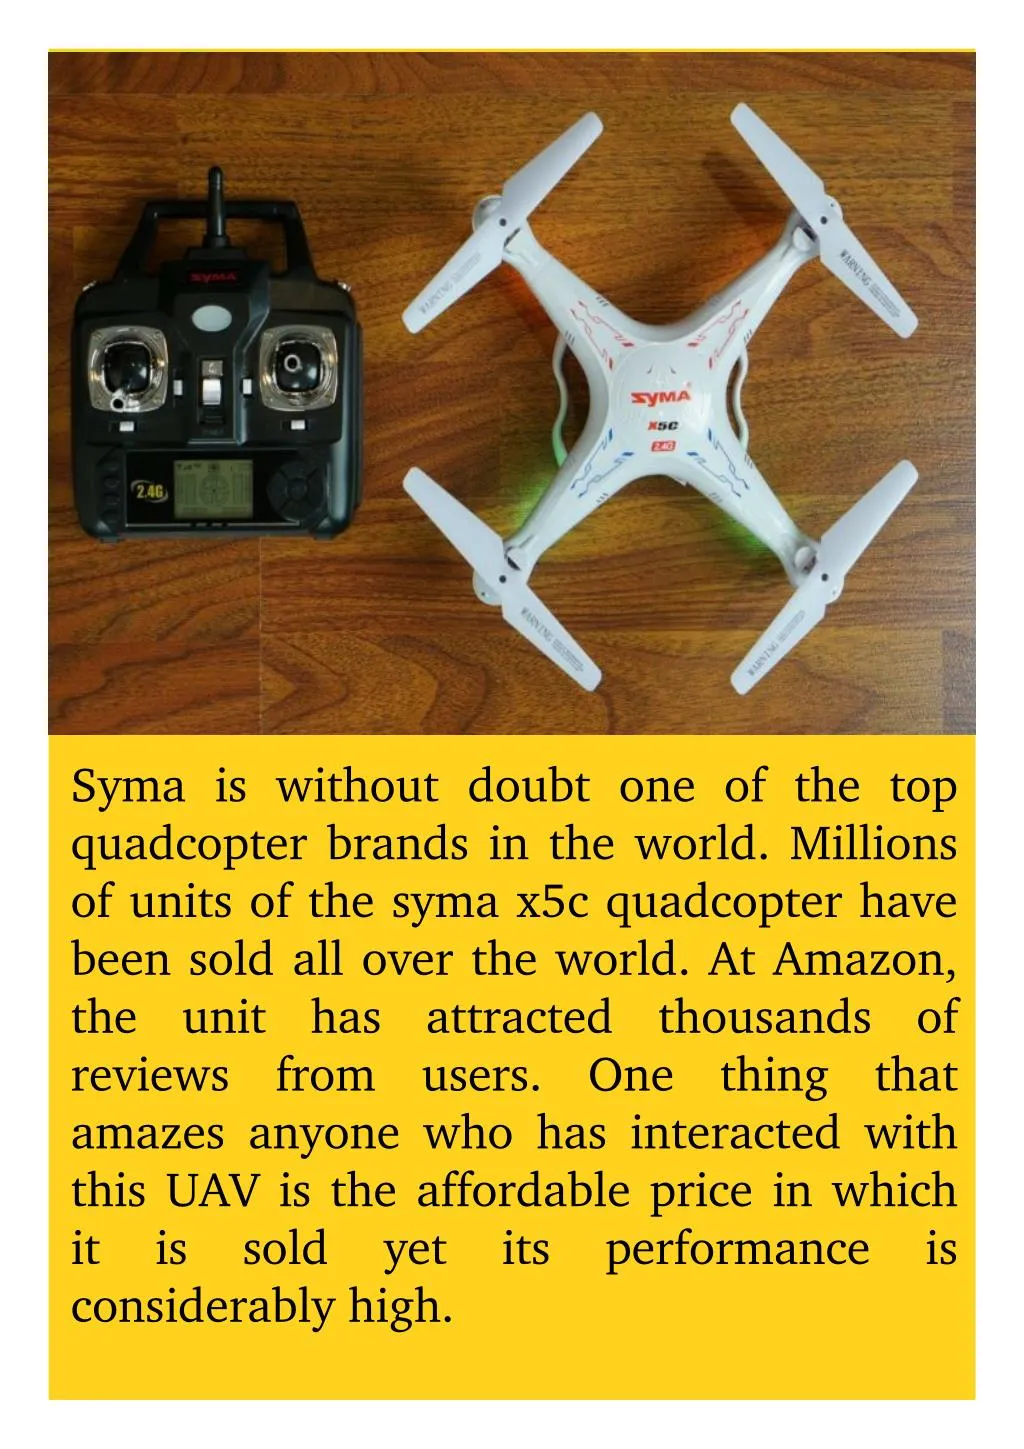 syma is without doubt one of the top quadcopter